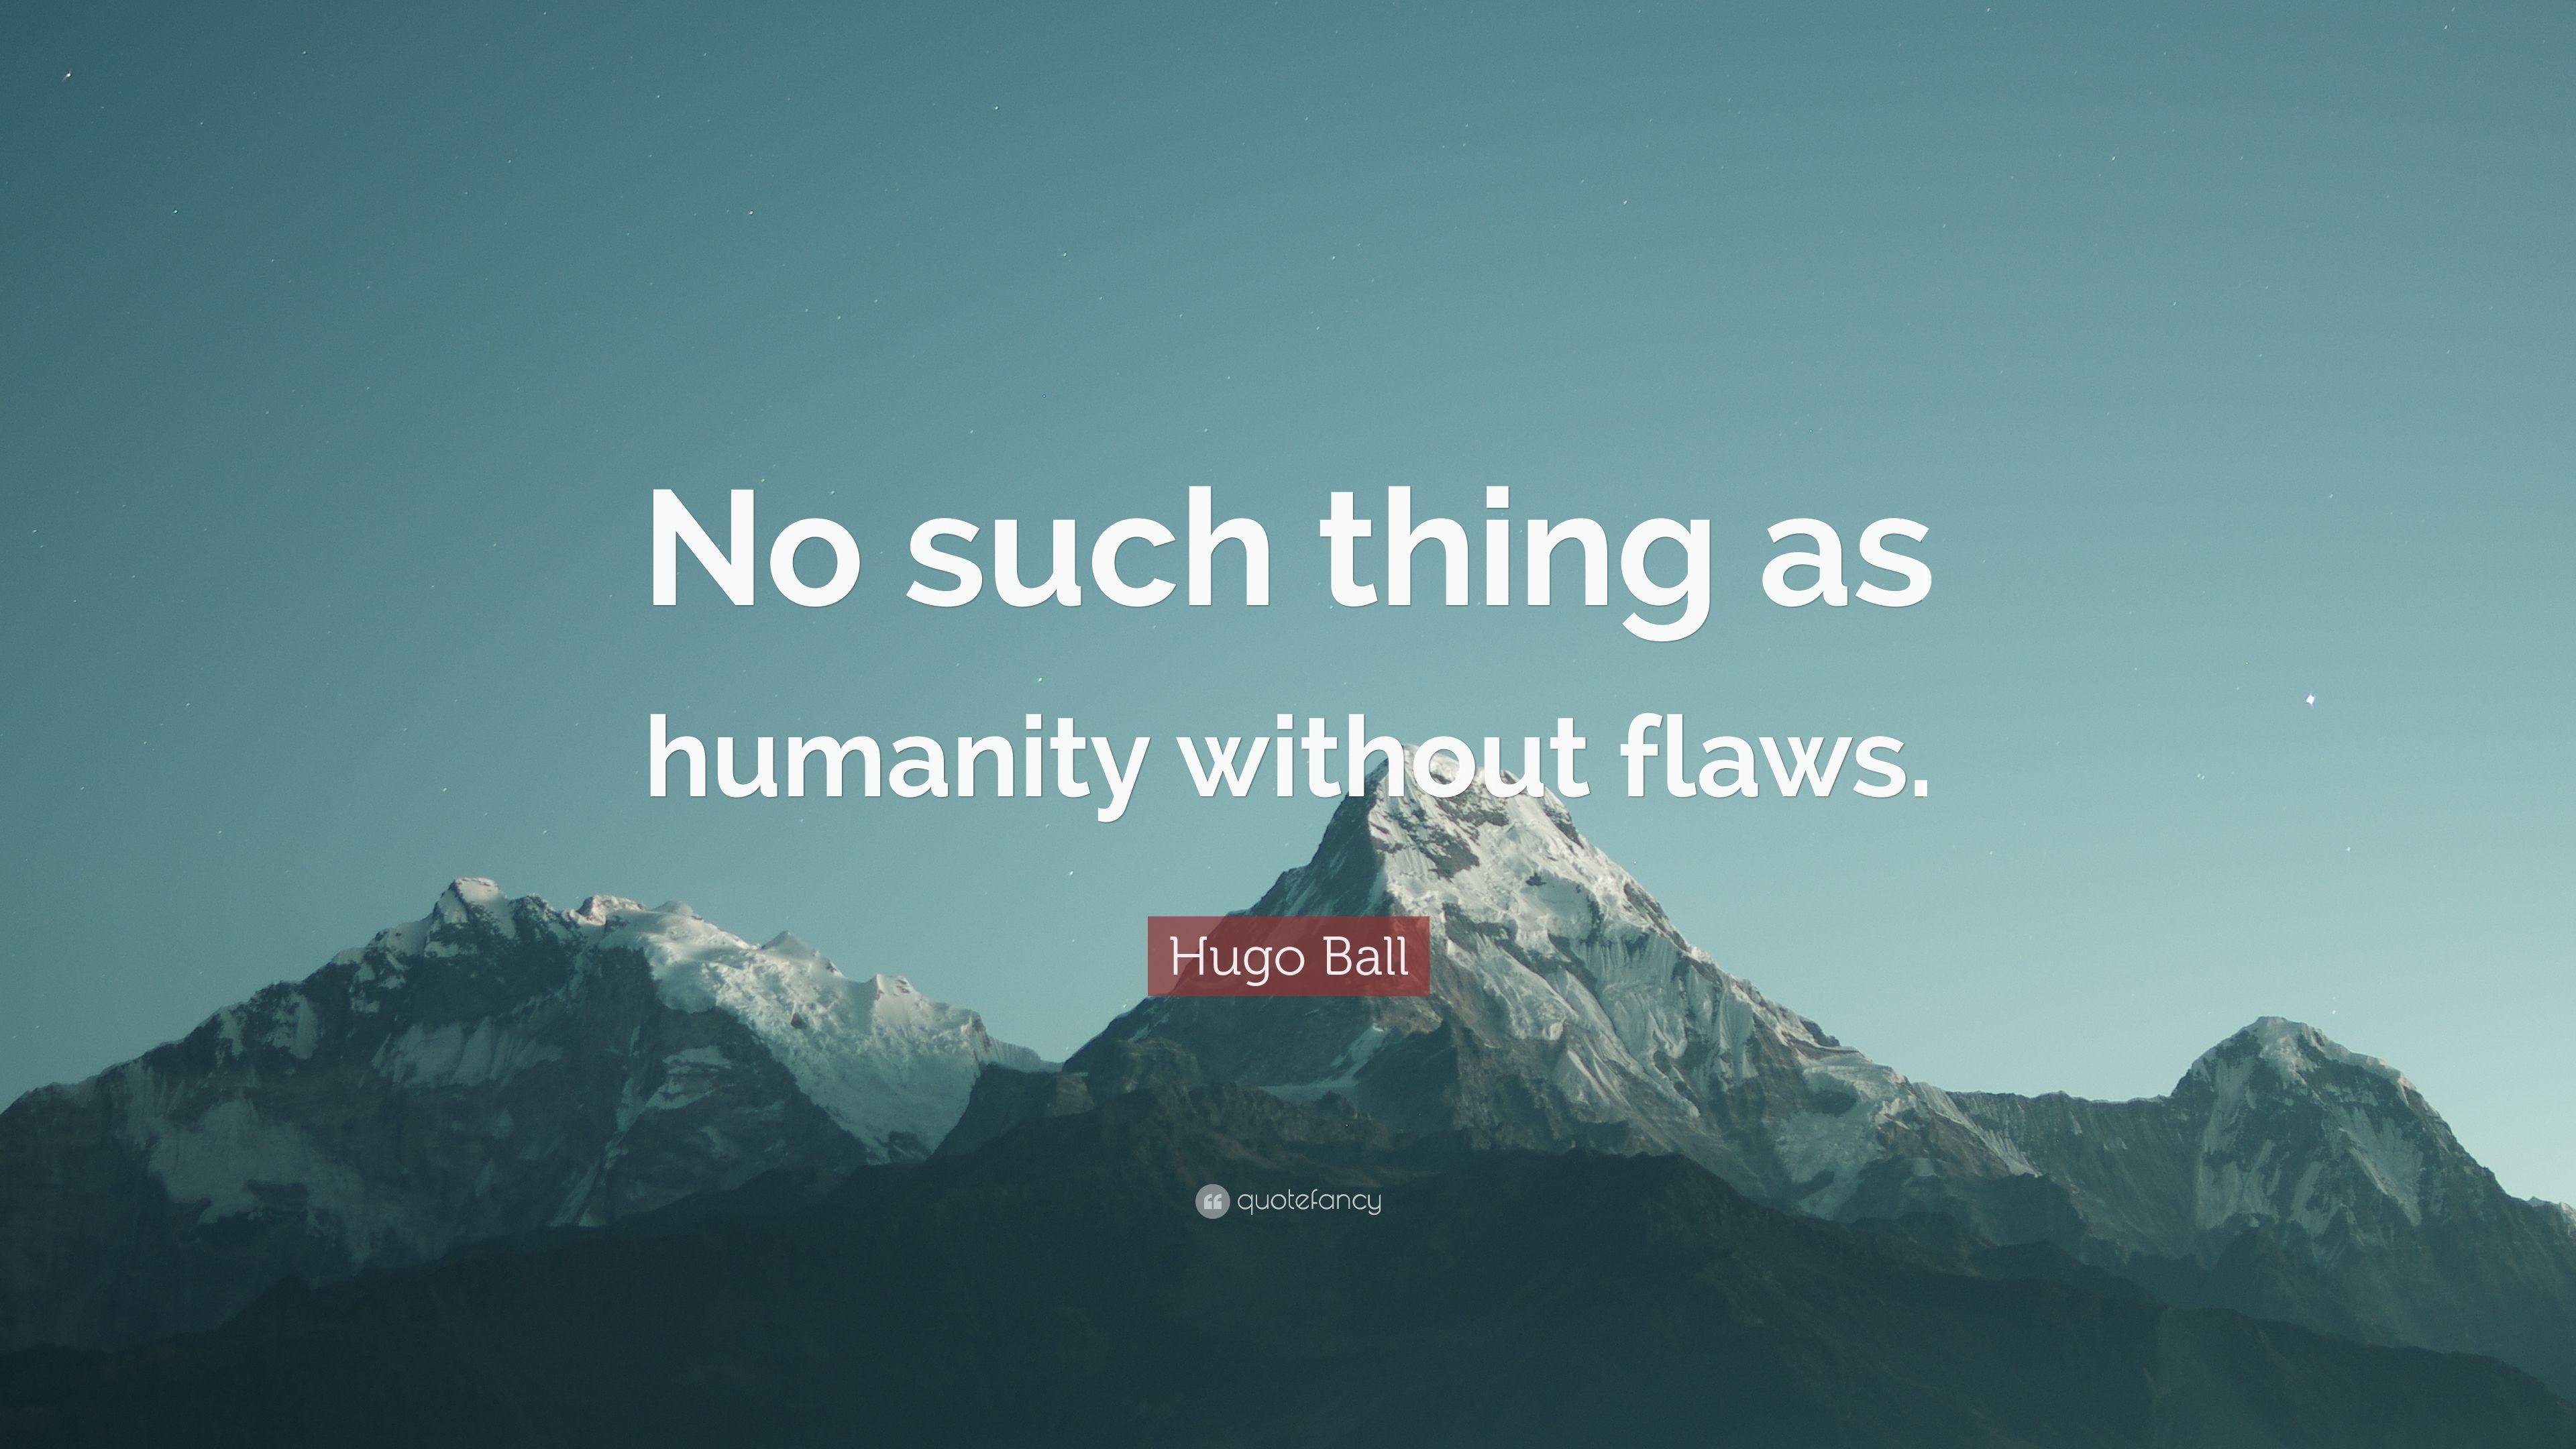 Hugo Ball Quote: “No such thing as humanity without flaws.” 5